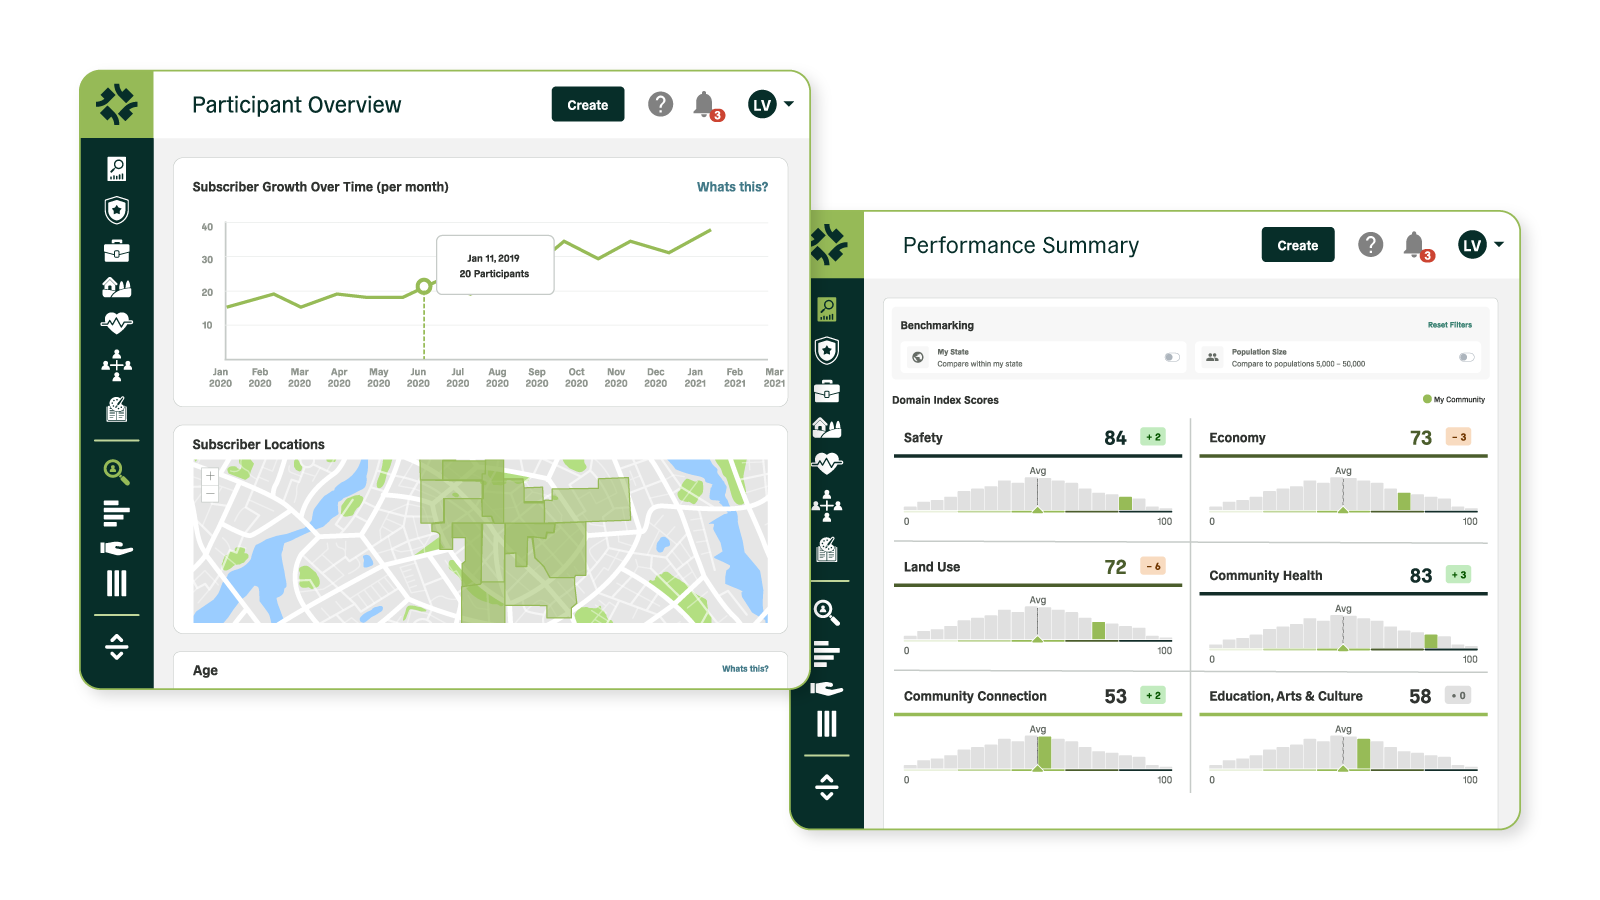 The Small Cities Pilot Program provides the information you need to make smart decisions with expertly curated city data dashboards.